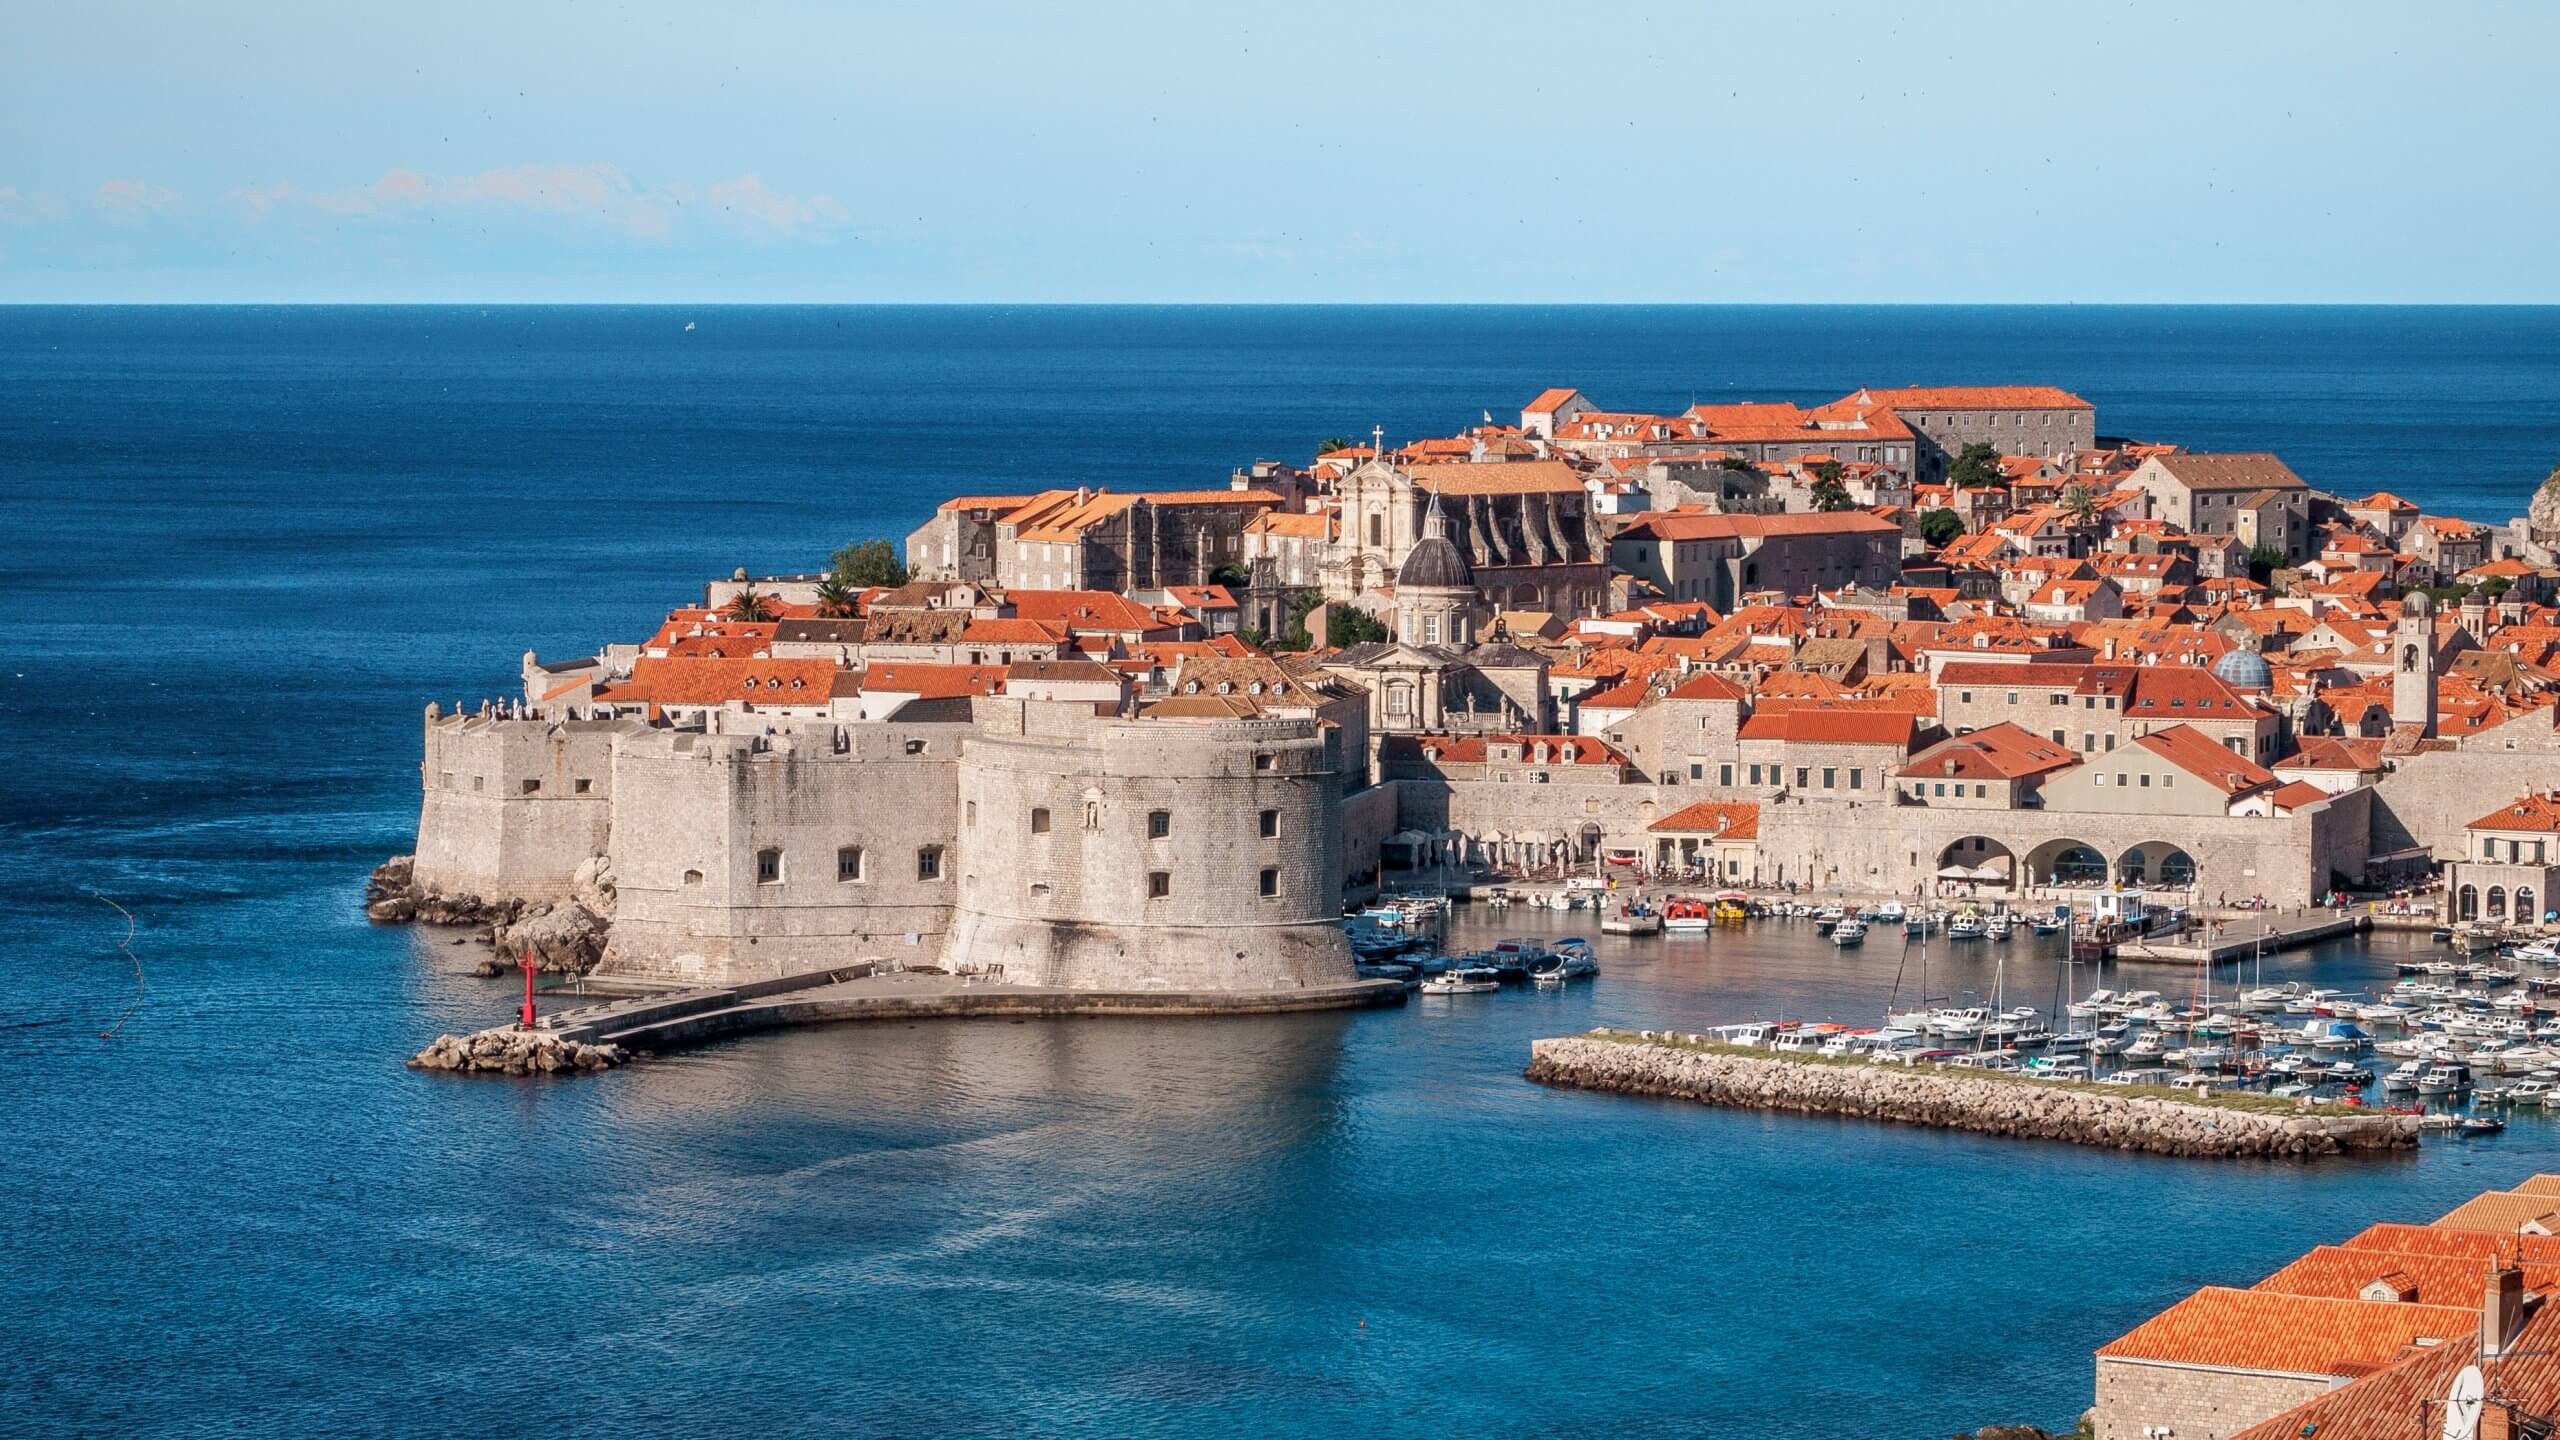 Dubrovnik's Old Town from outside of the city walls and marina